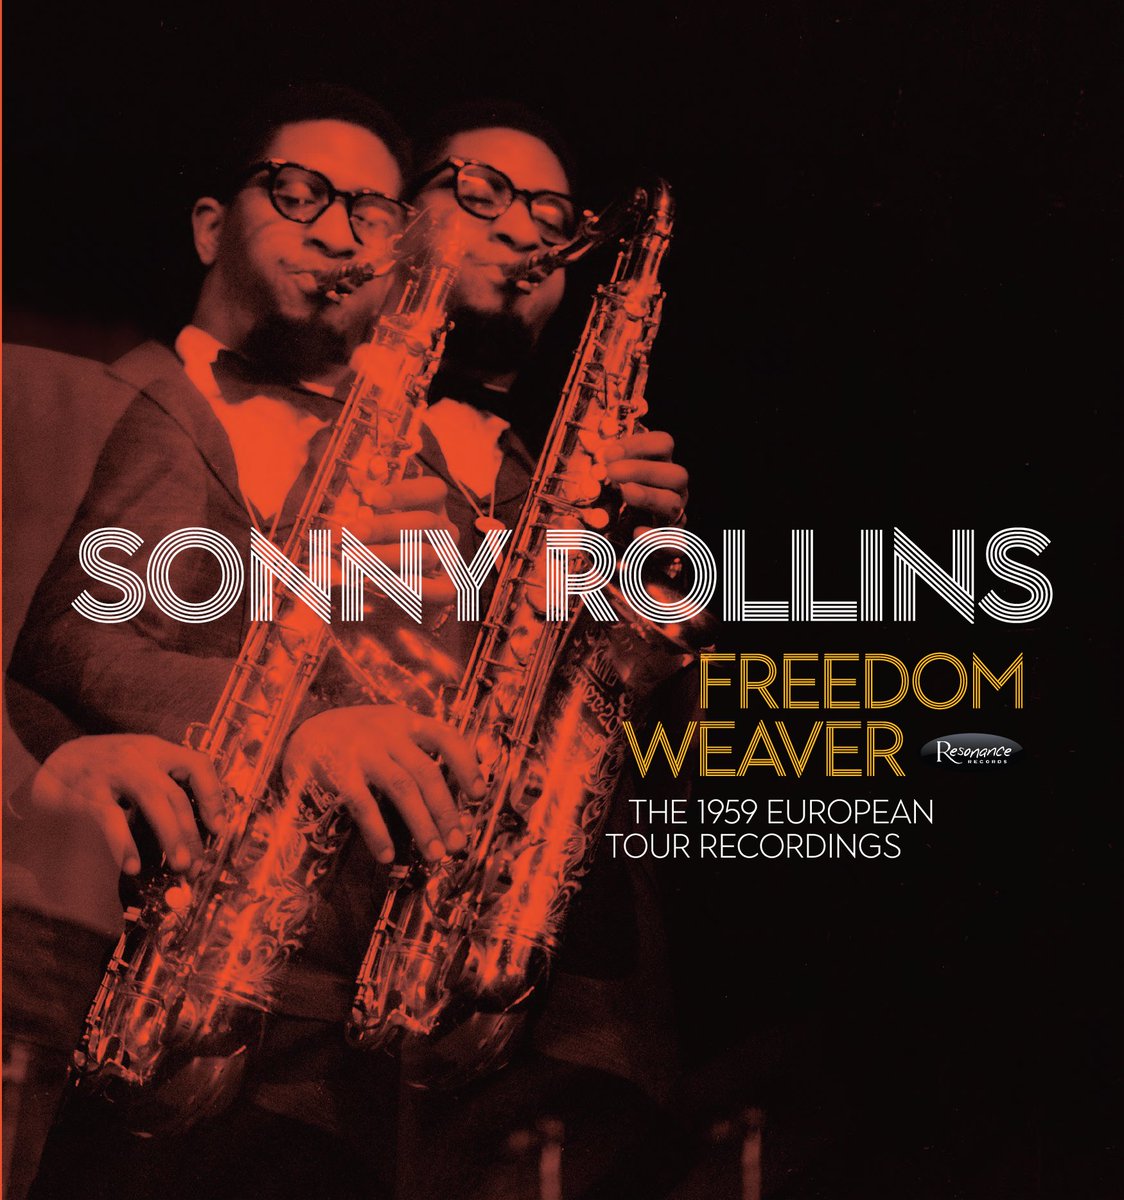 Monday at JazzWax, a new three-LP set from Resonance uniting all of Sonny Rollins' European recordings in March 1959—his last before he would take his famed Williamsburg Bridge sabbatical. Stunning work with sparkling sound. Go here... tinyurl.com/mr4df9b9